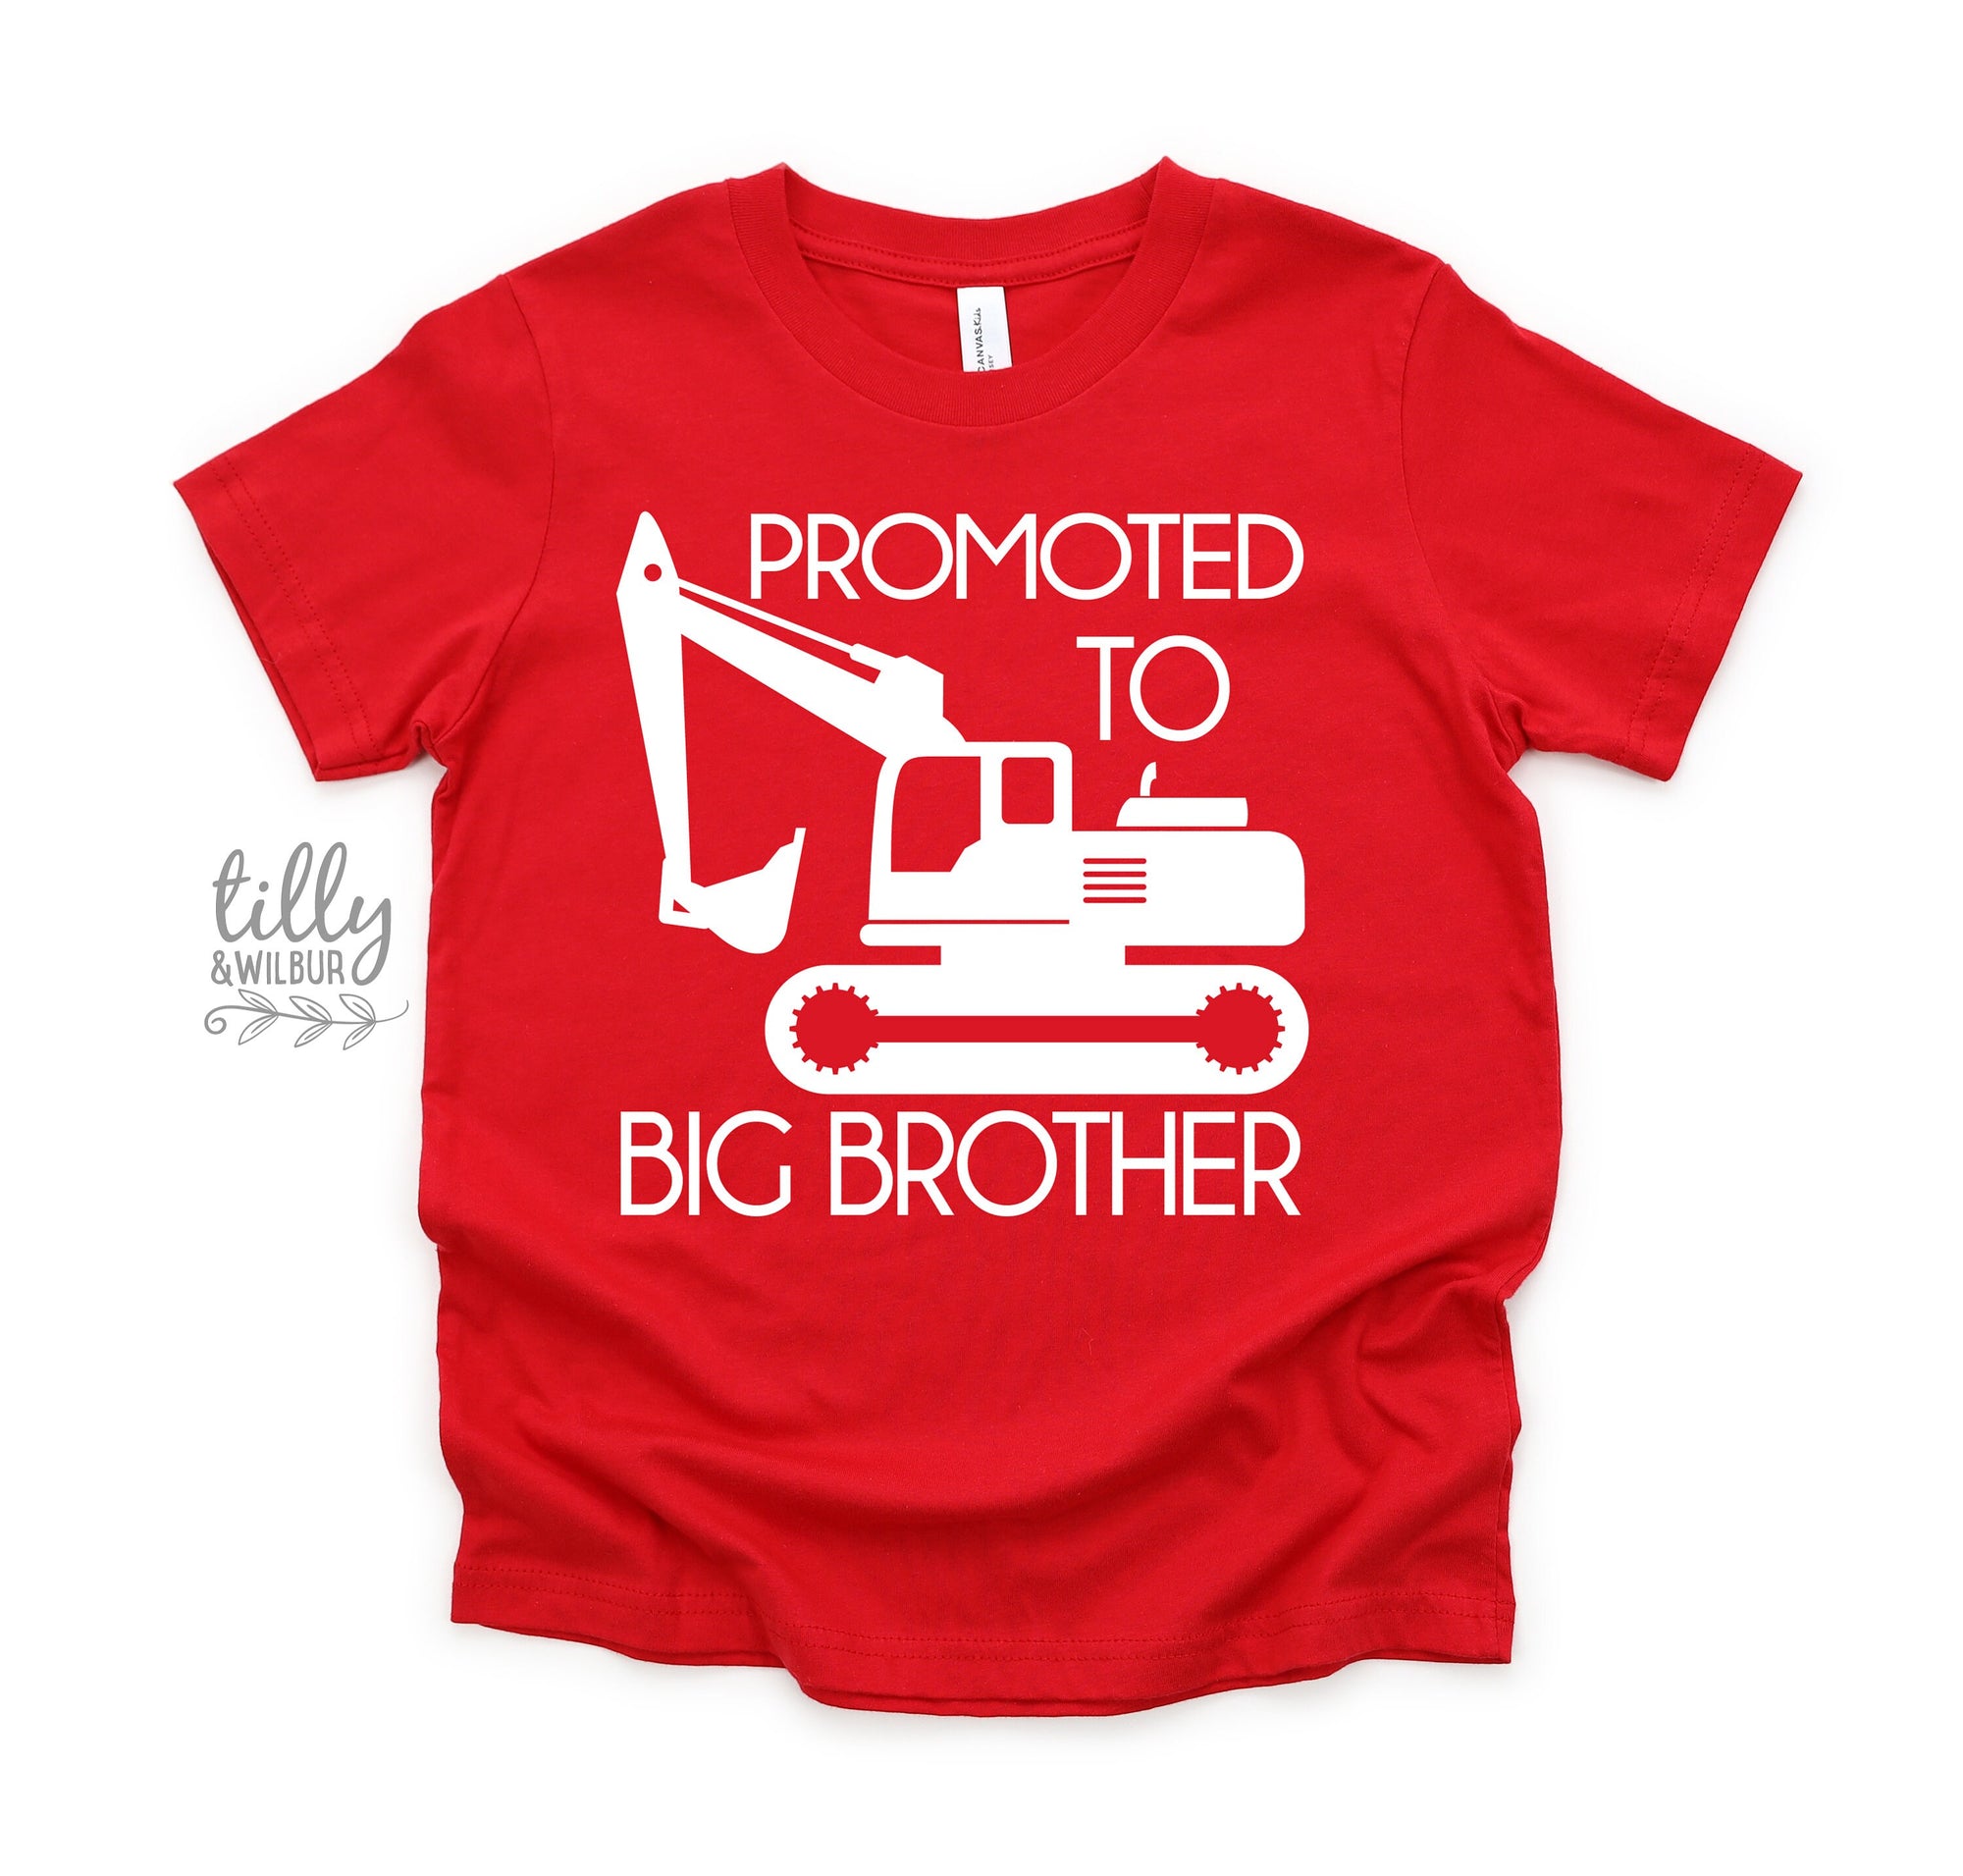 Big Brother T-Shirt, Promoted To Big Brother Shirt, Excavator T-Shirt, Digger T-Shirt, I'm Going To Be A Big Brother, Pregnancy Announcement